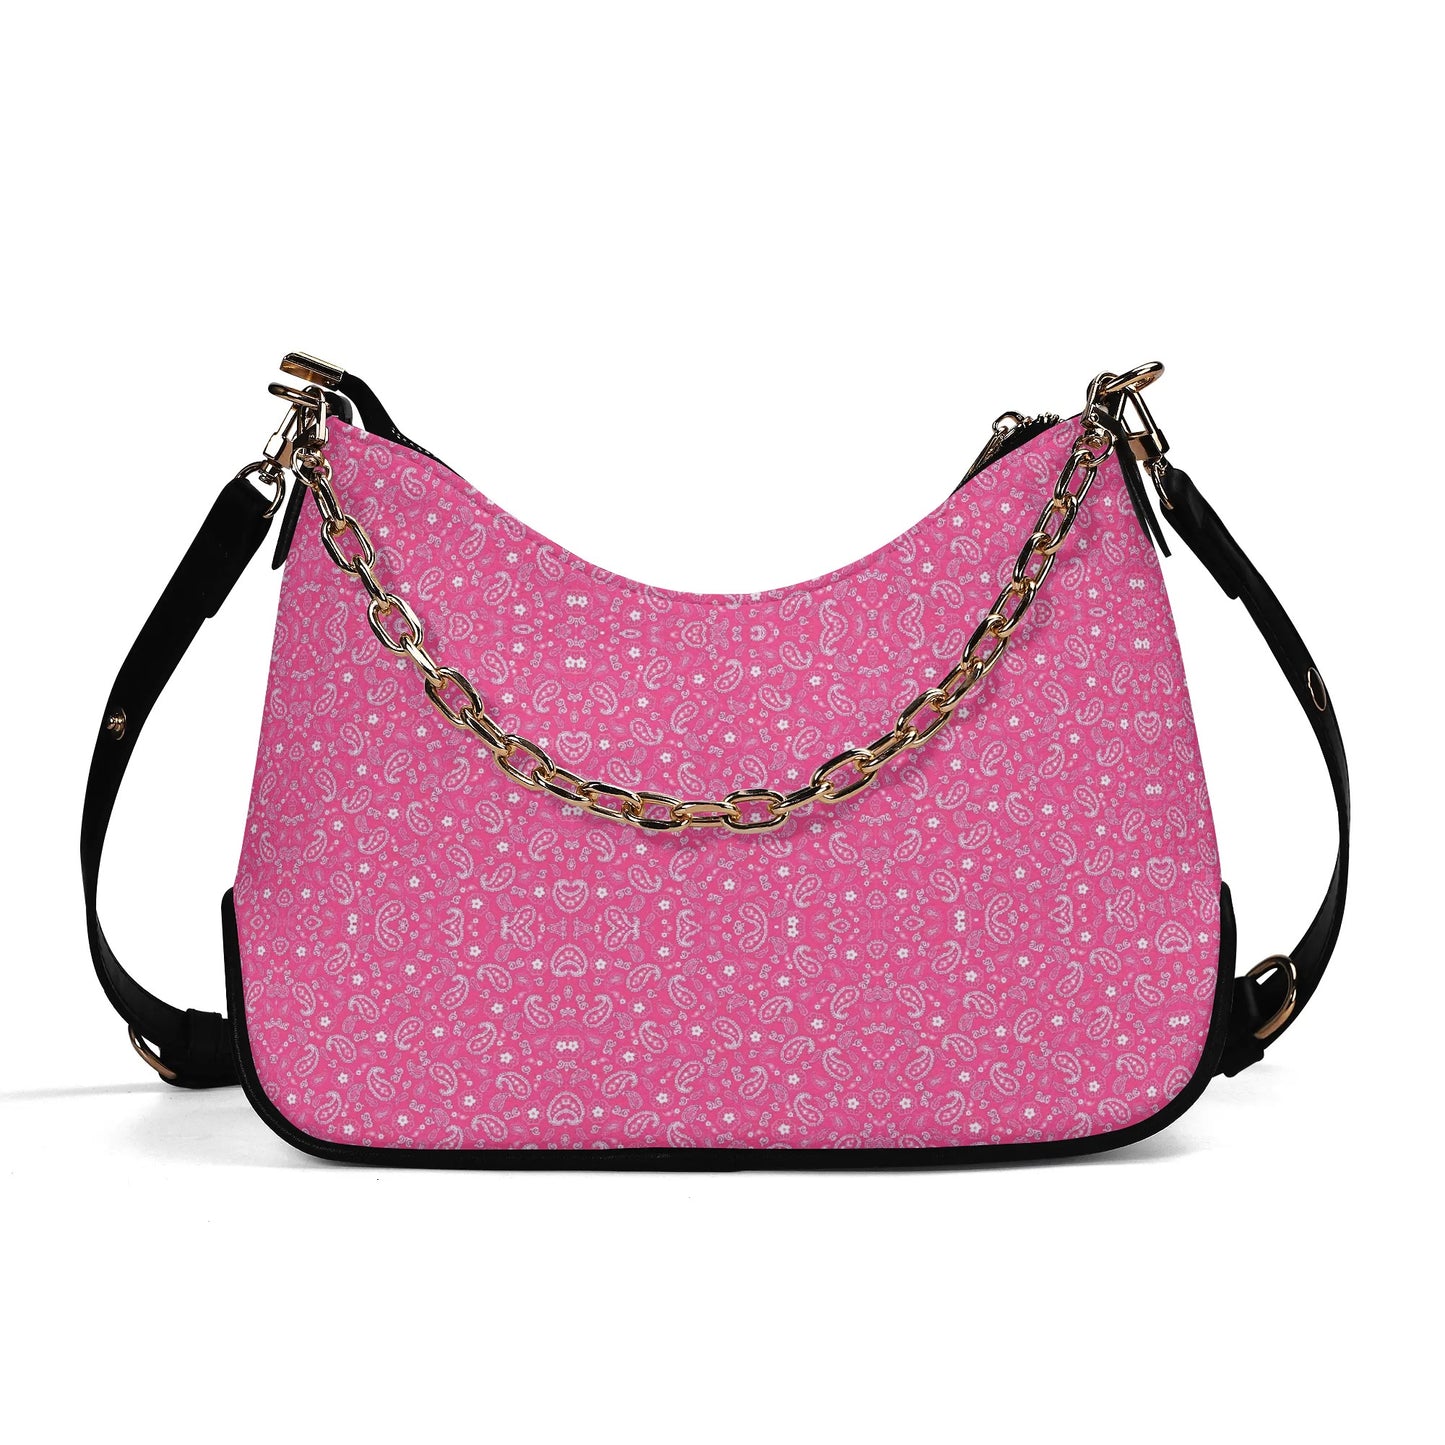 T4x Cross-body Pink Scarf Pattern Bag with Chain Decoration